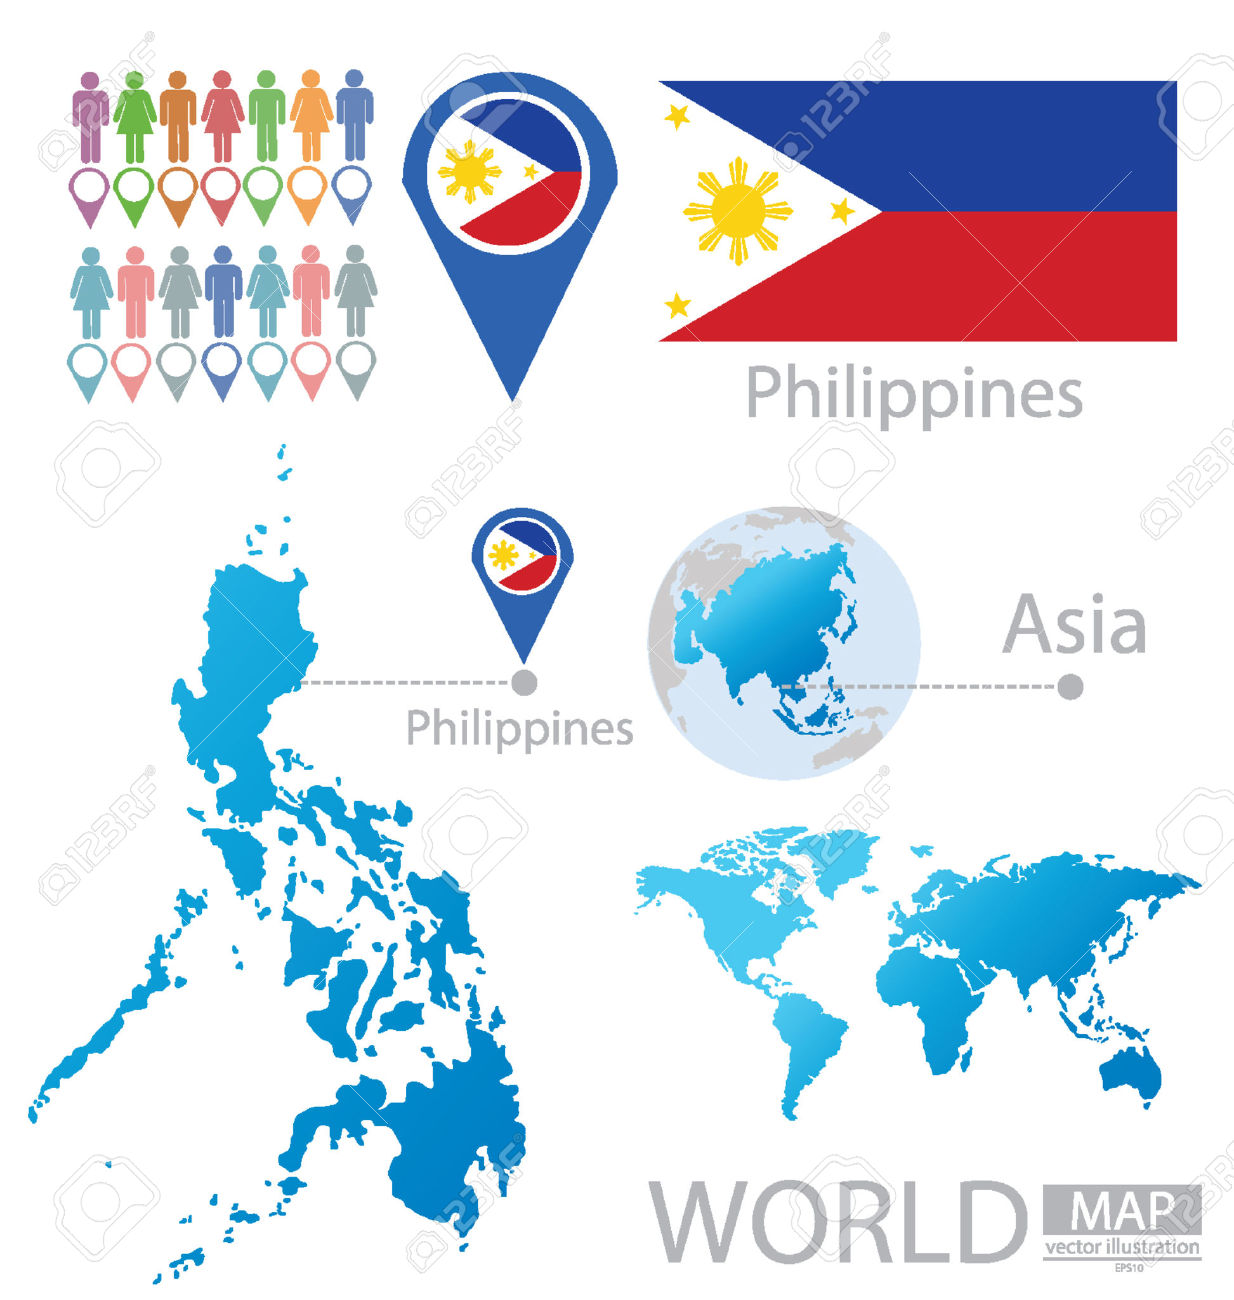 Republic Of The Philippines Vector Illustration Royalty Free.